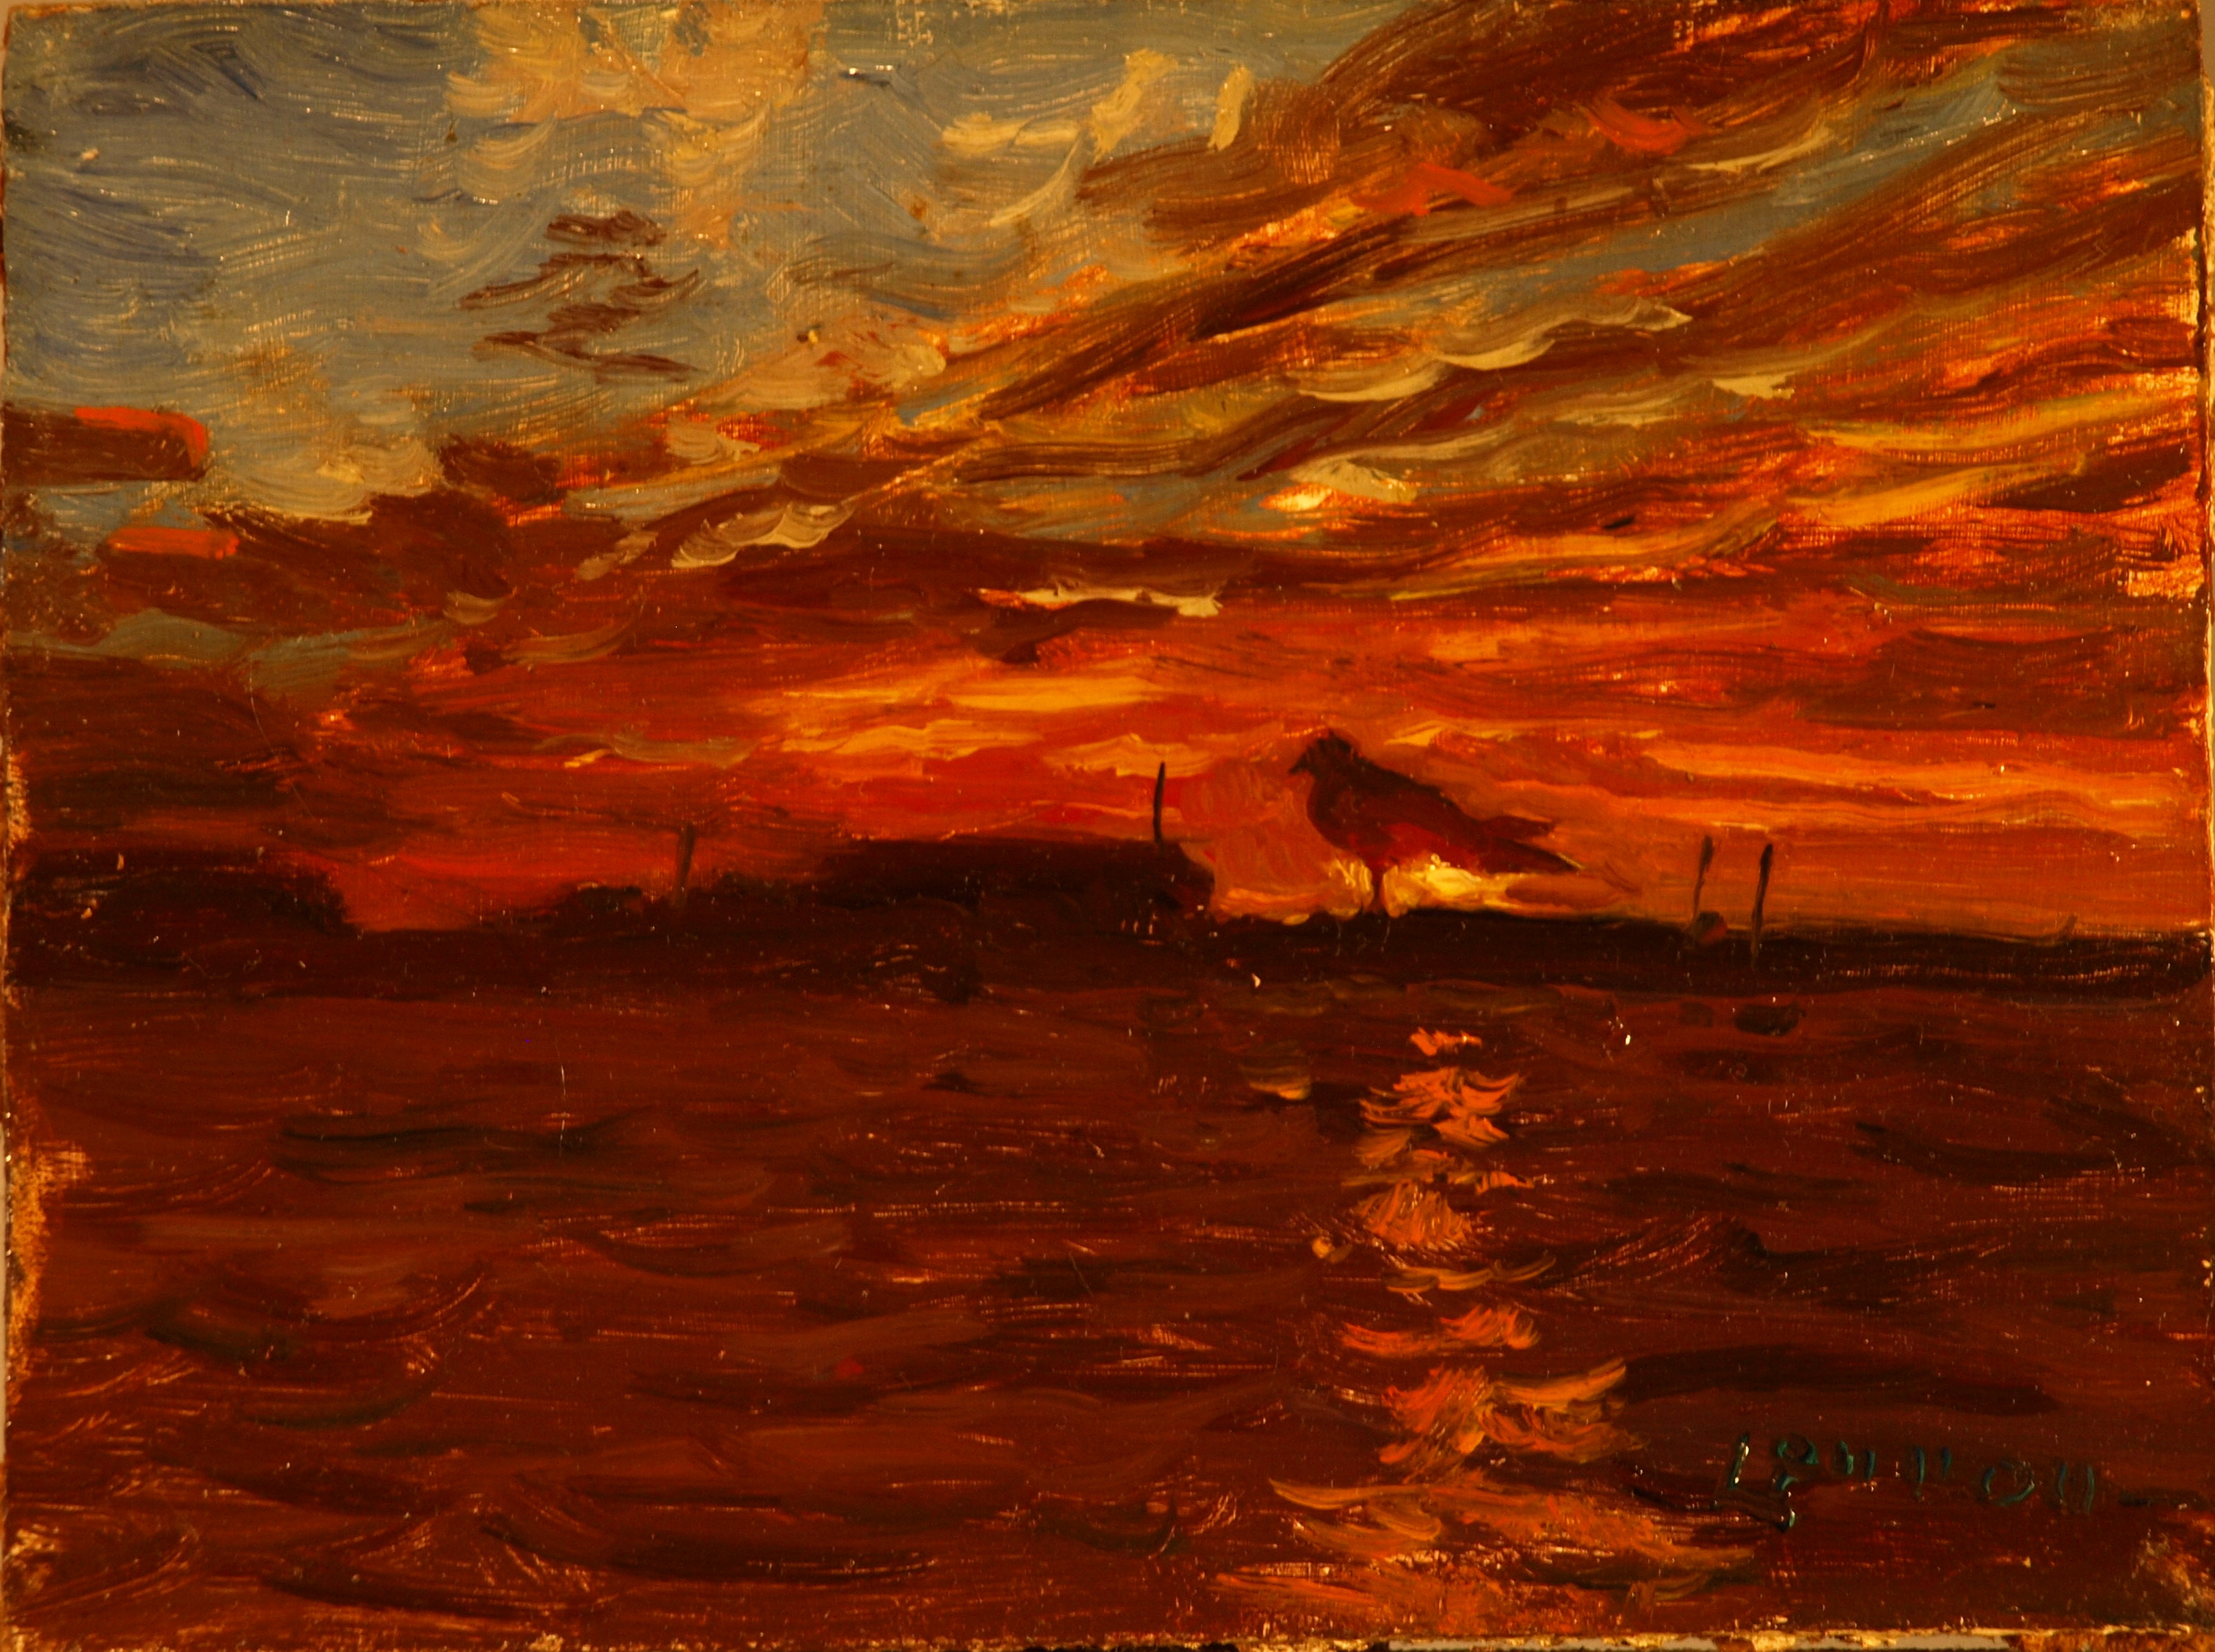 Provincetown Sunset, Oil on Panel, 6 x 8 Inches, by Bernard Lennon, $175